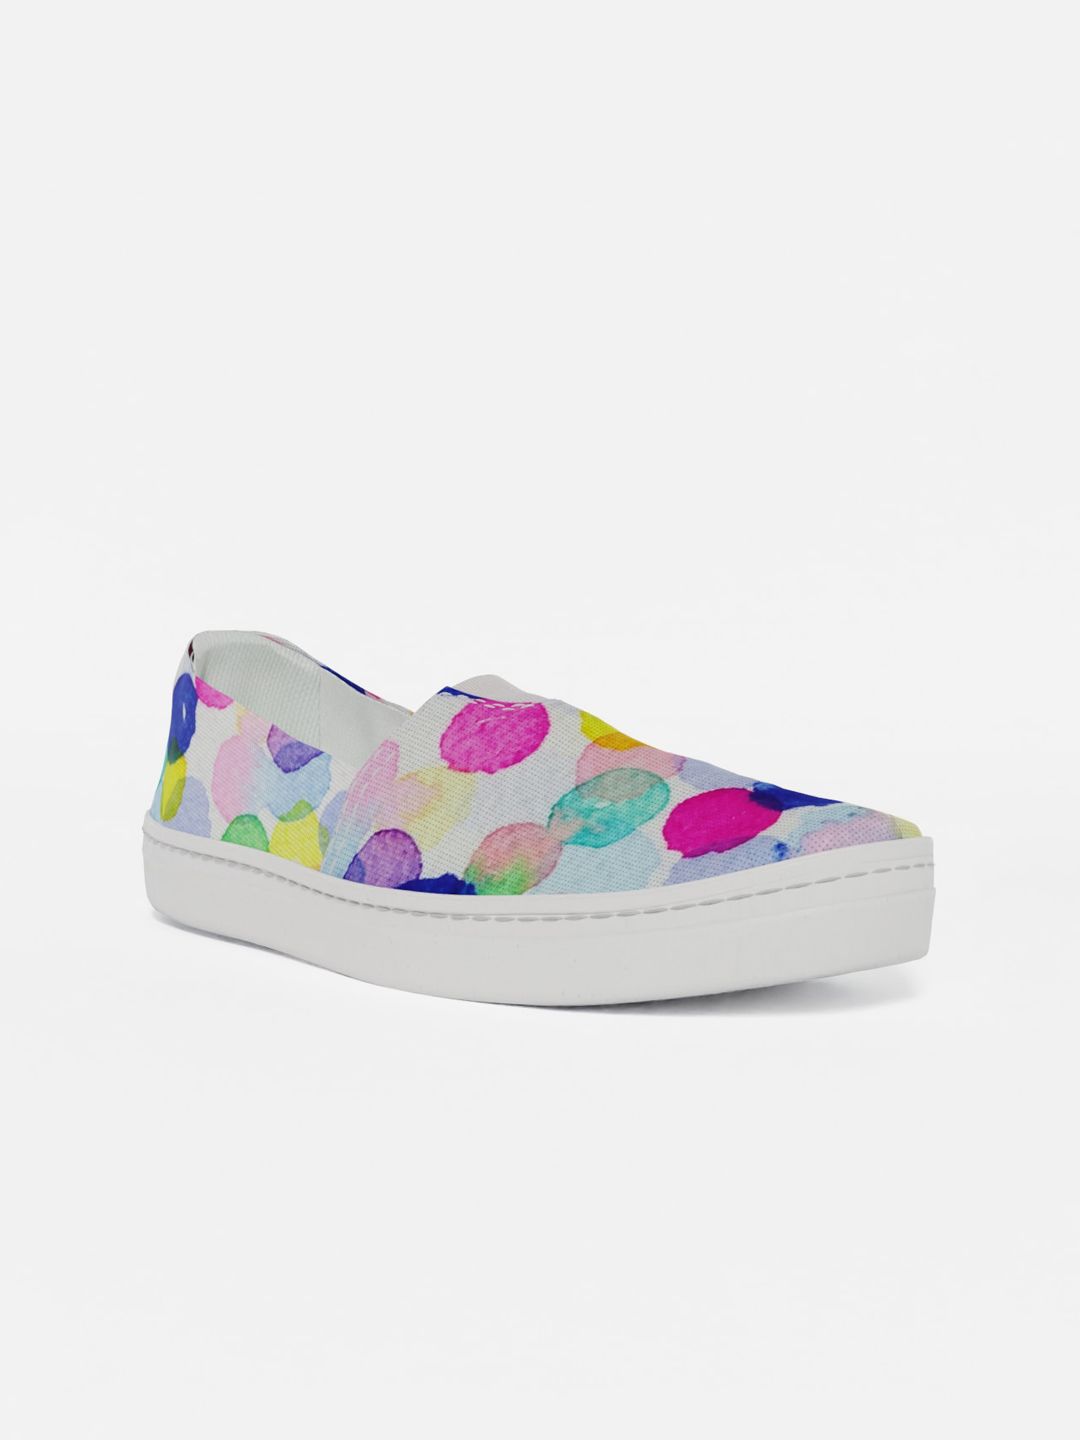 LOKAIT The Sneakers Company Women Pink Printed Slip-On Sneakers Price in India